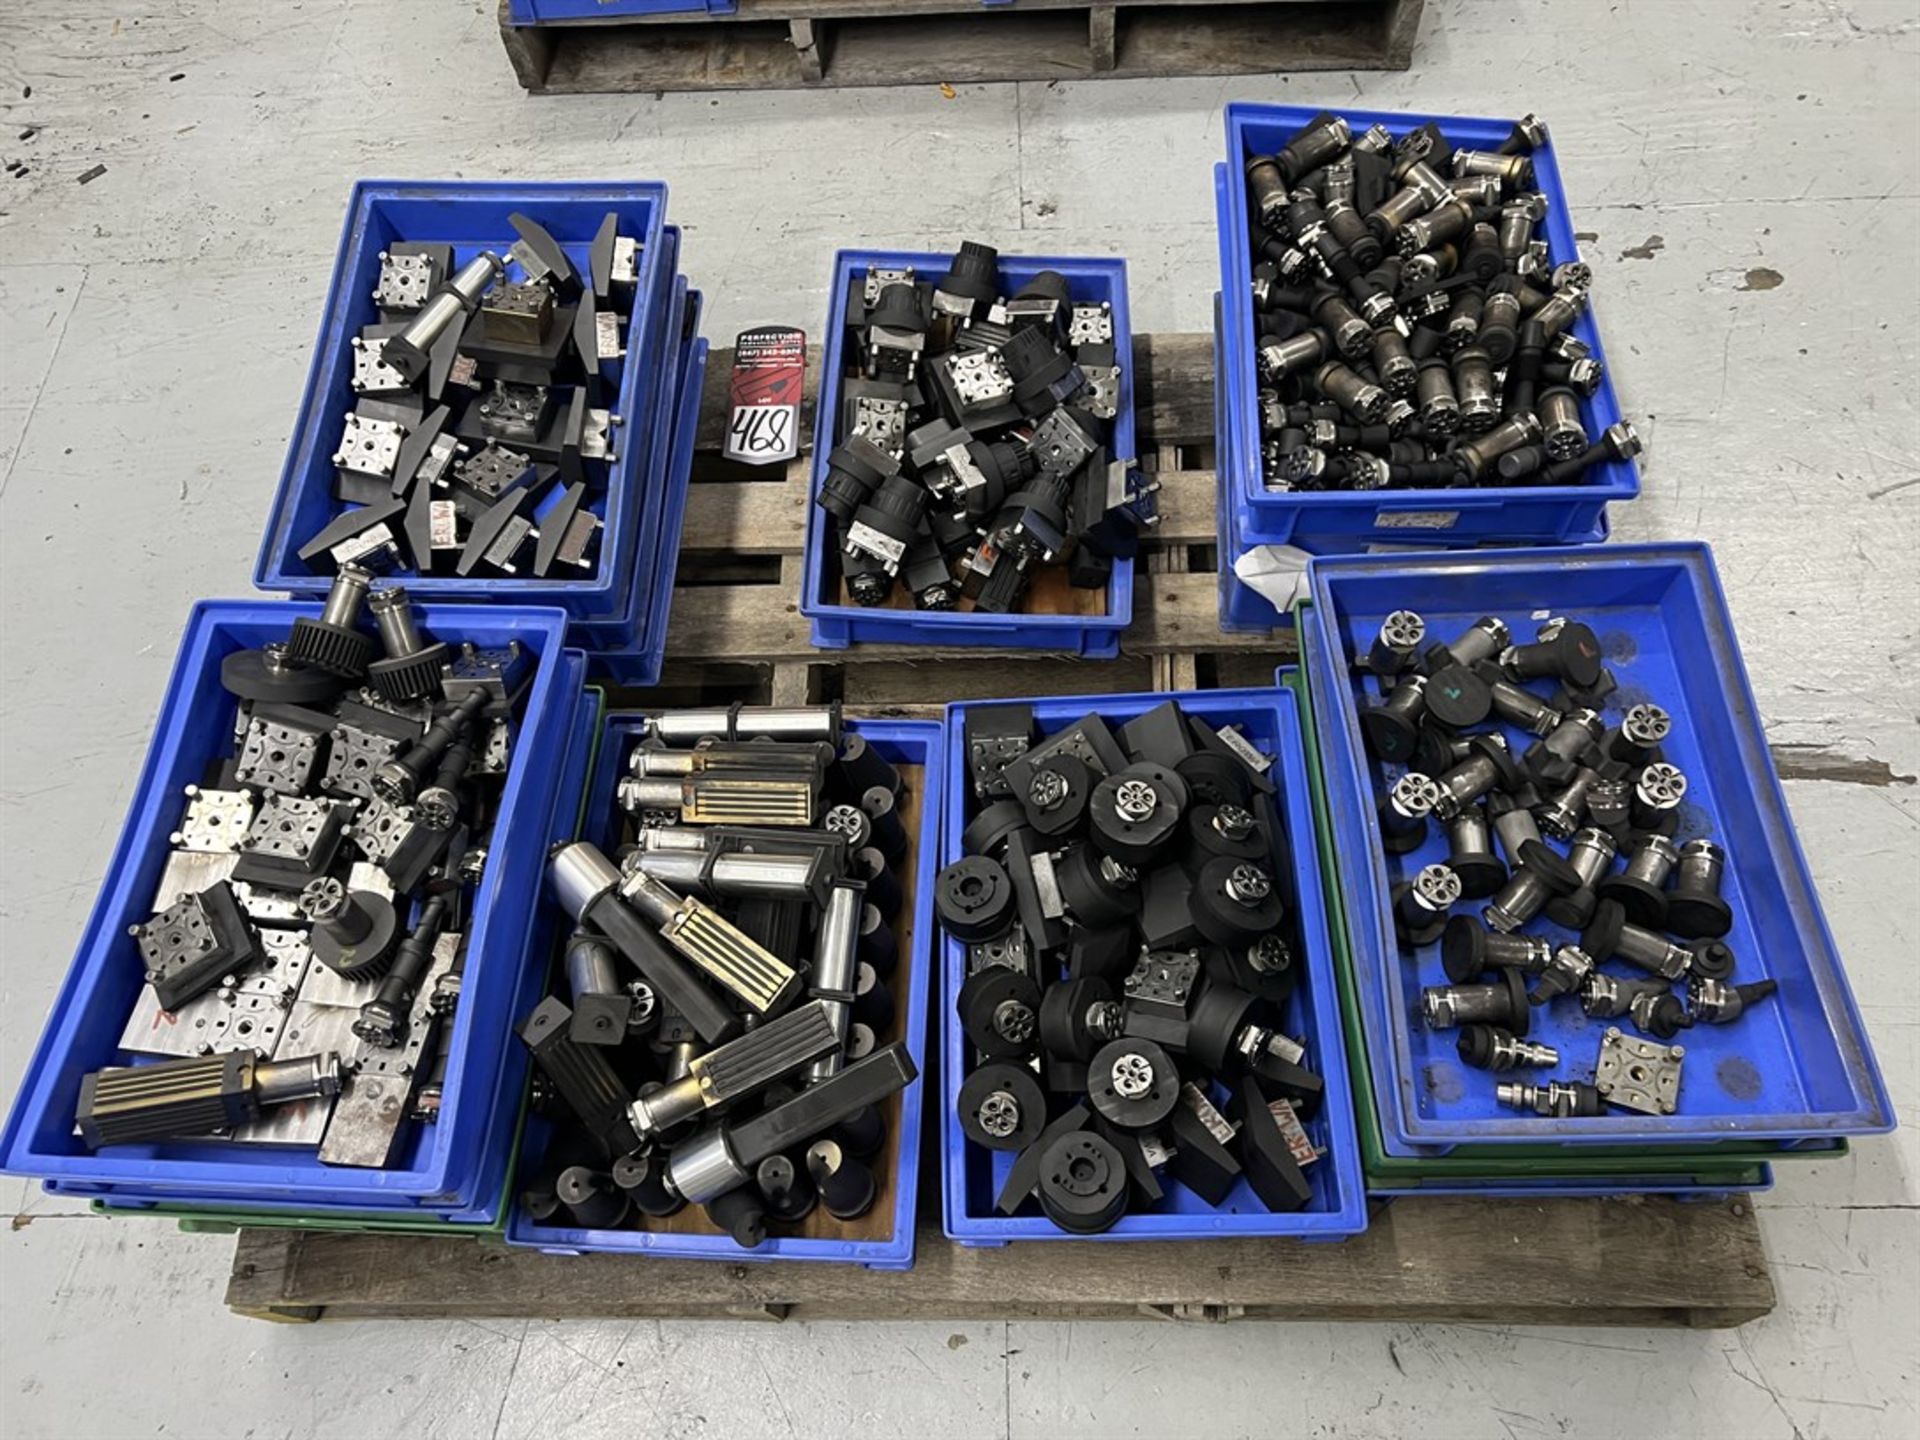 Pallet of Assorted EROWA EDM Tooling, Fixtures, and Electrodes